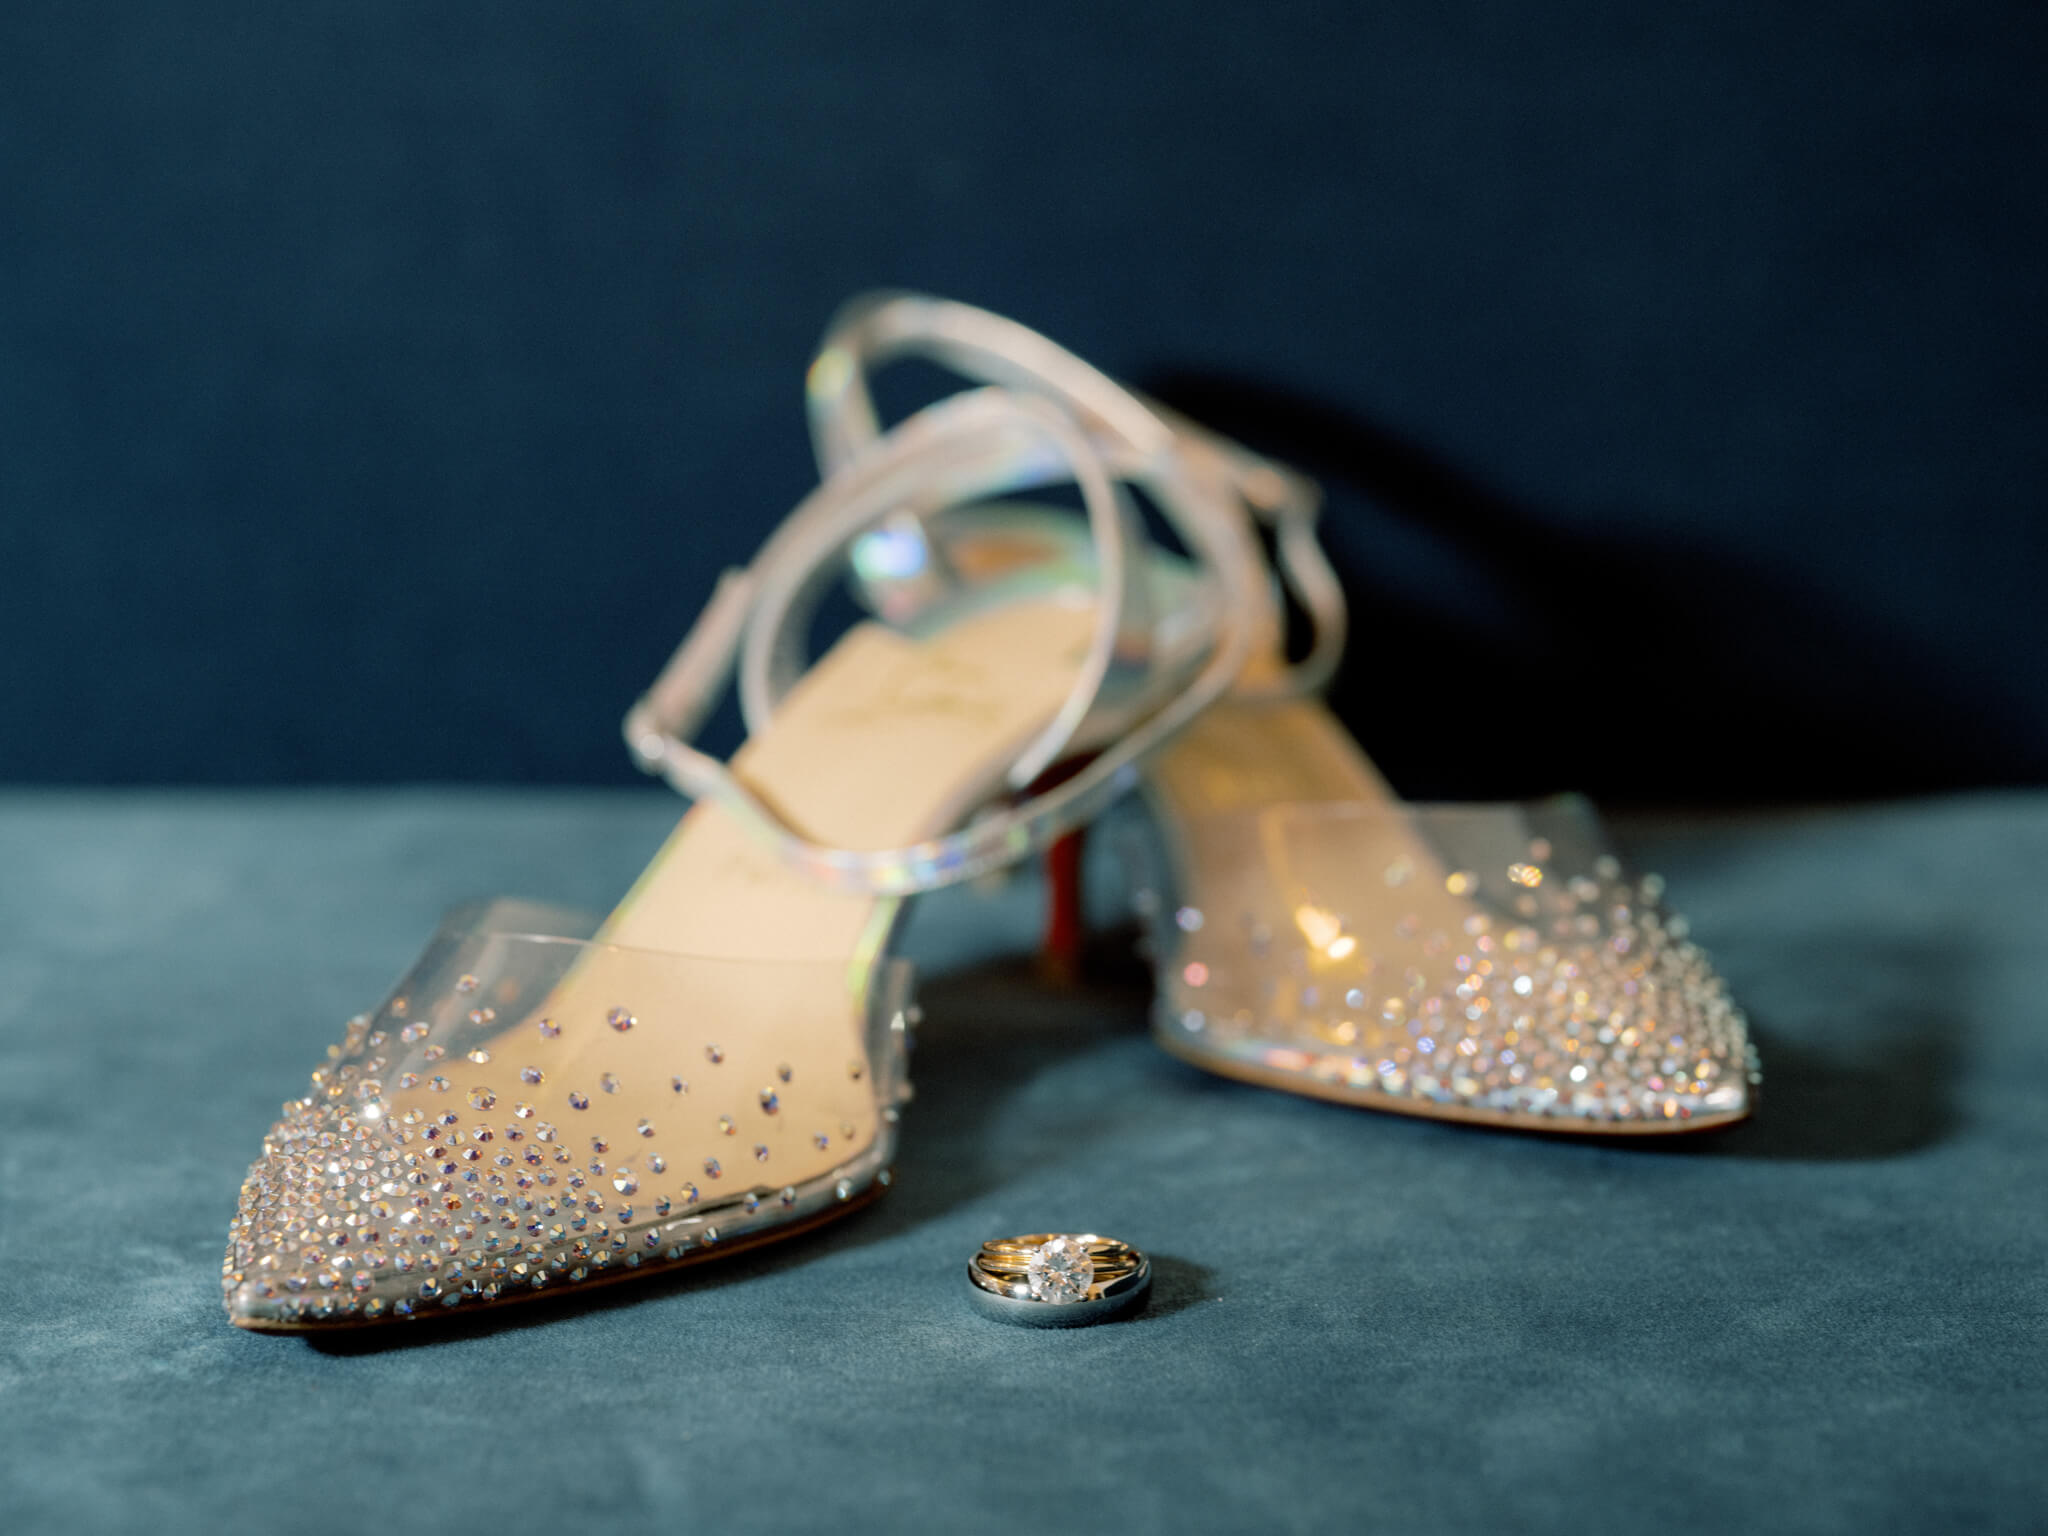 Editorial photo of the bride's wedding shoes by Christian Louboutin and engagement and wedding bands. Manatta wedding Image by Jenny Fu Studio NYC